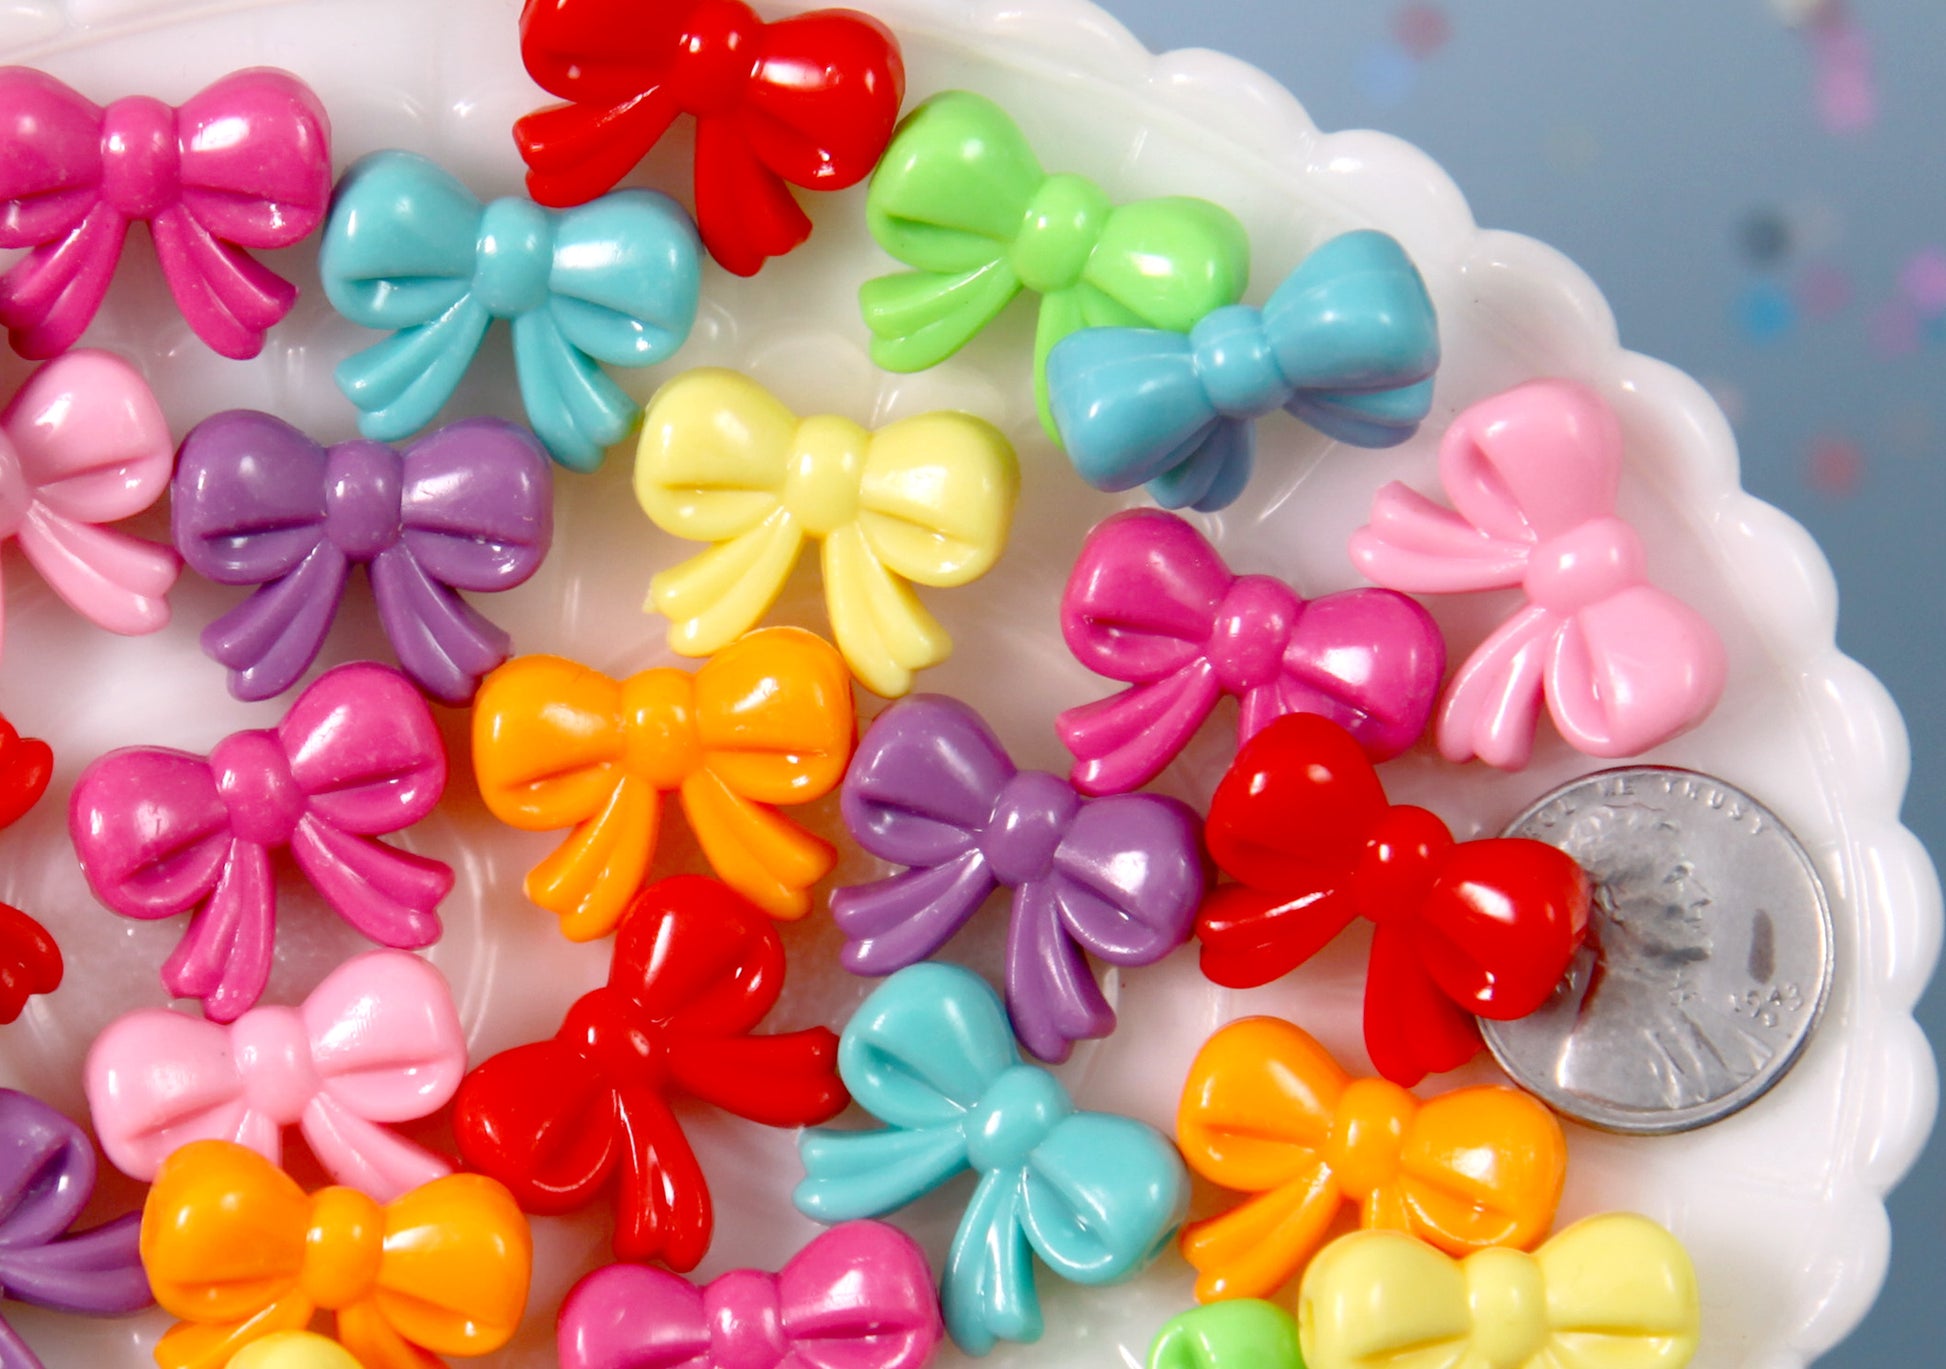 Acrylic Beads - 20mm Small Colorful Bow or Ribbon Shape Acrylic or Res